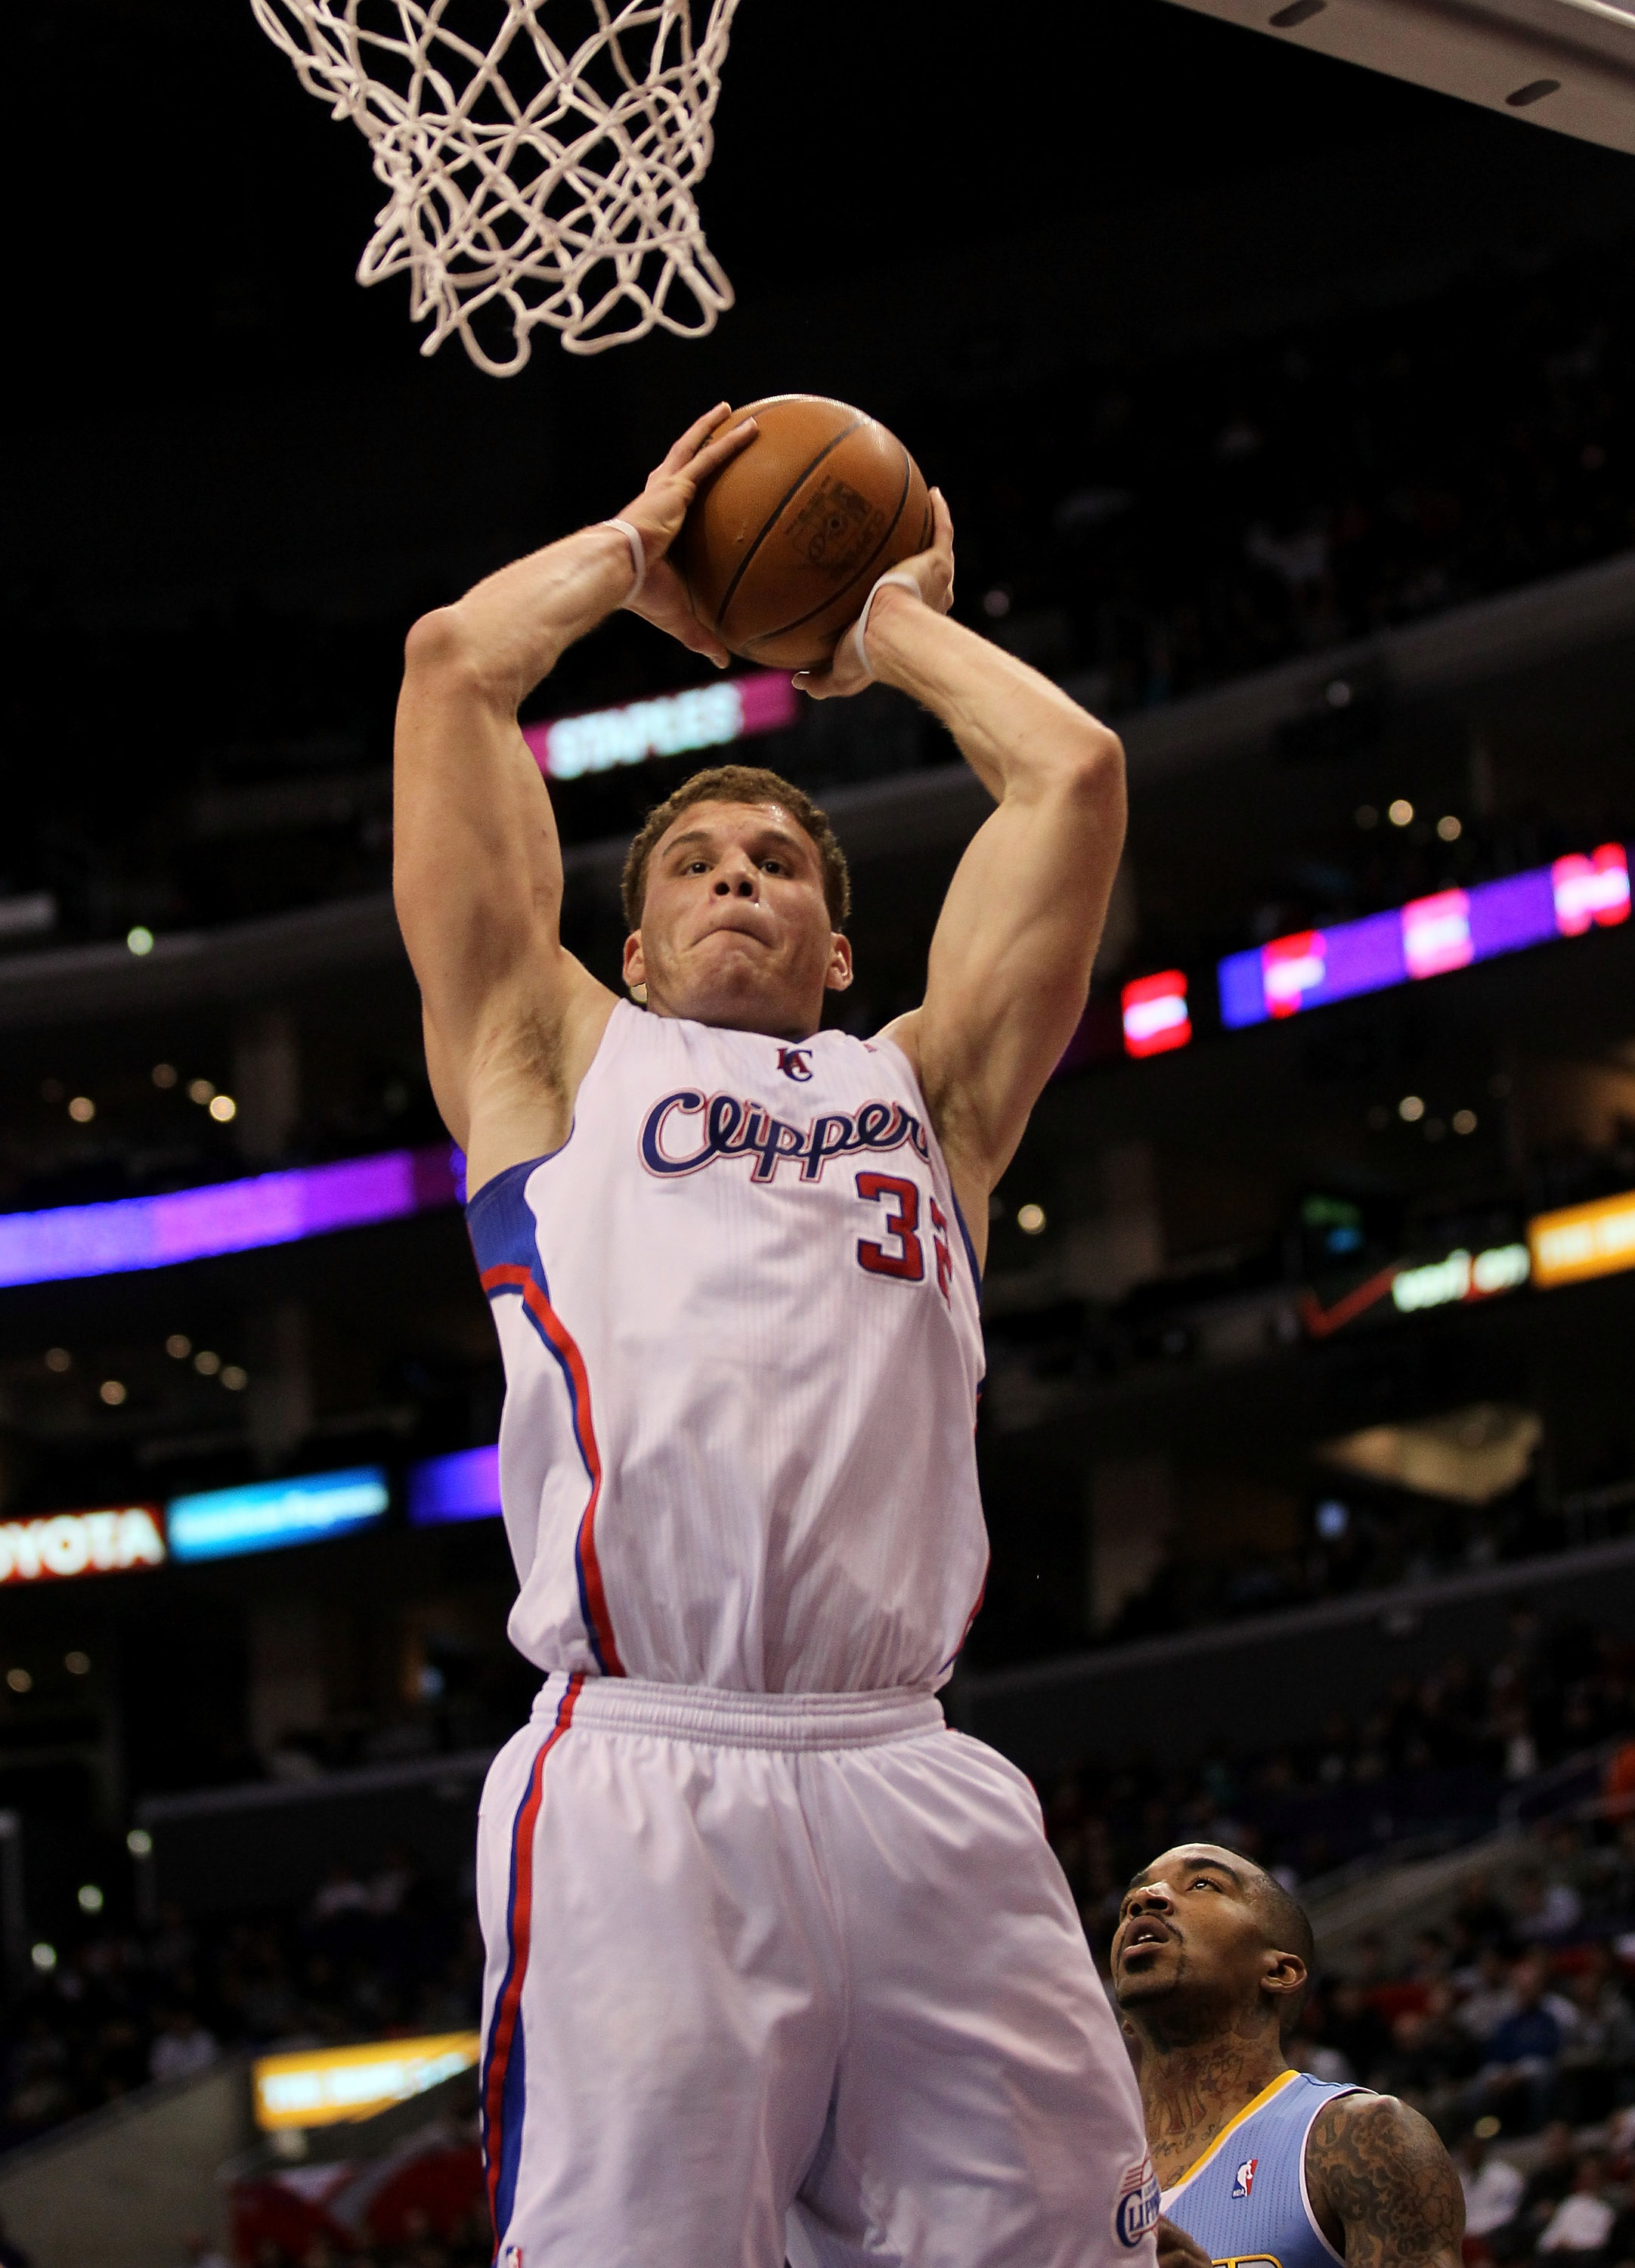 Blake Griffin, Clippers Rookie, Becomes NBA Star with Monster Dunks